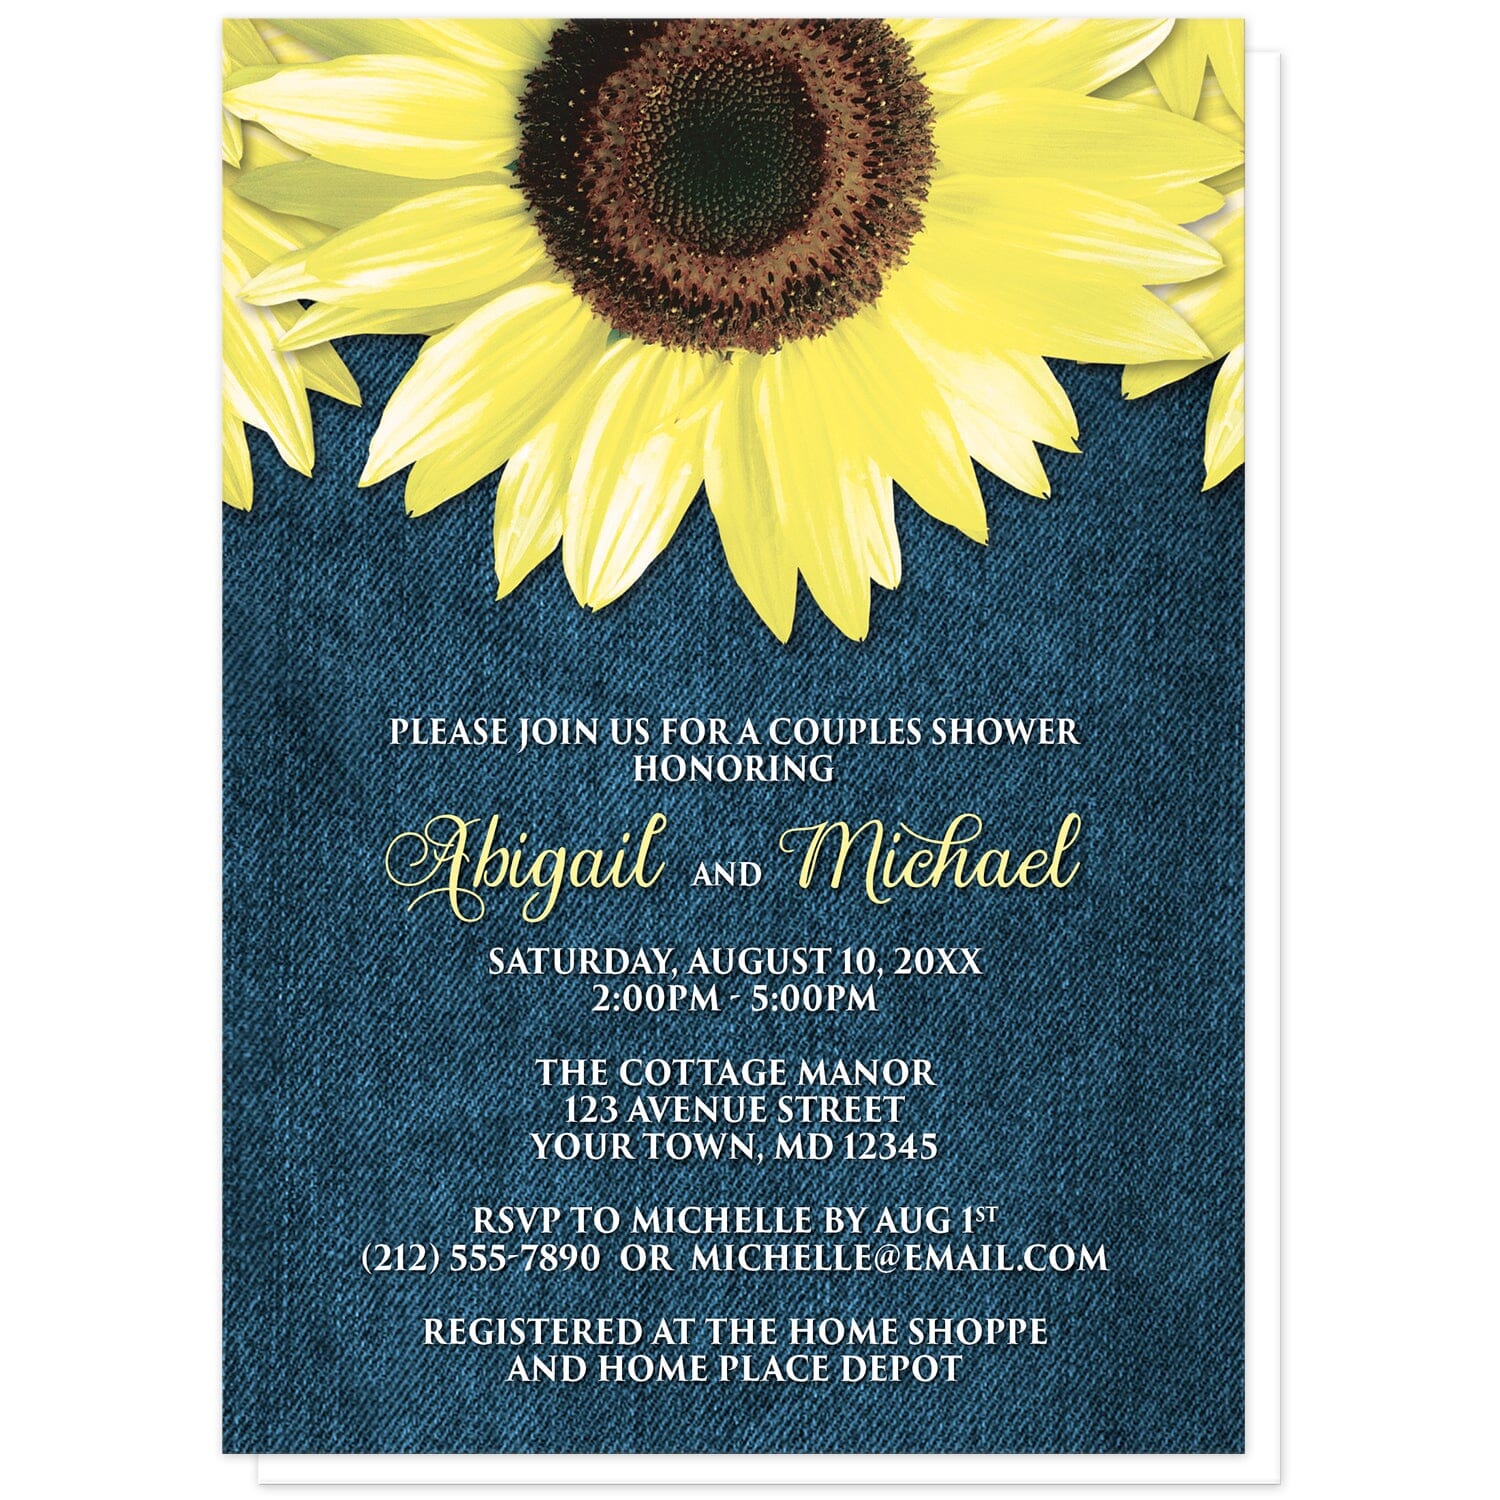 Rustic Sunflower and Denim Couples Shower Invitations at Artistically Invited. Southern-inspired rustic sunflower and denim couples shower invitations designed with large yellow sunflowers along the top over a country blue denim design. Your personalized couples shower celebration details are custom printed in yellow and white over the blue denim background below the pretty sunflowers. 